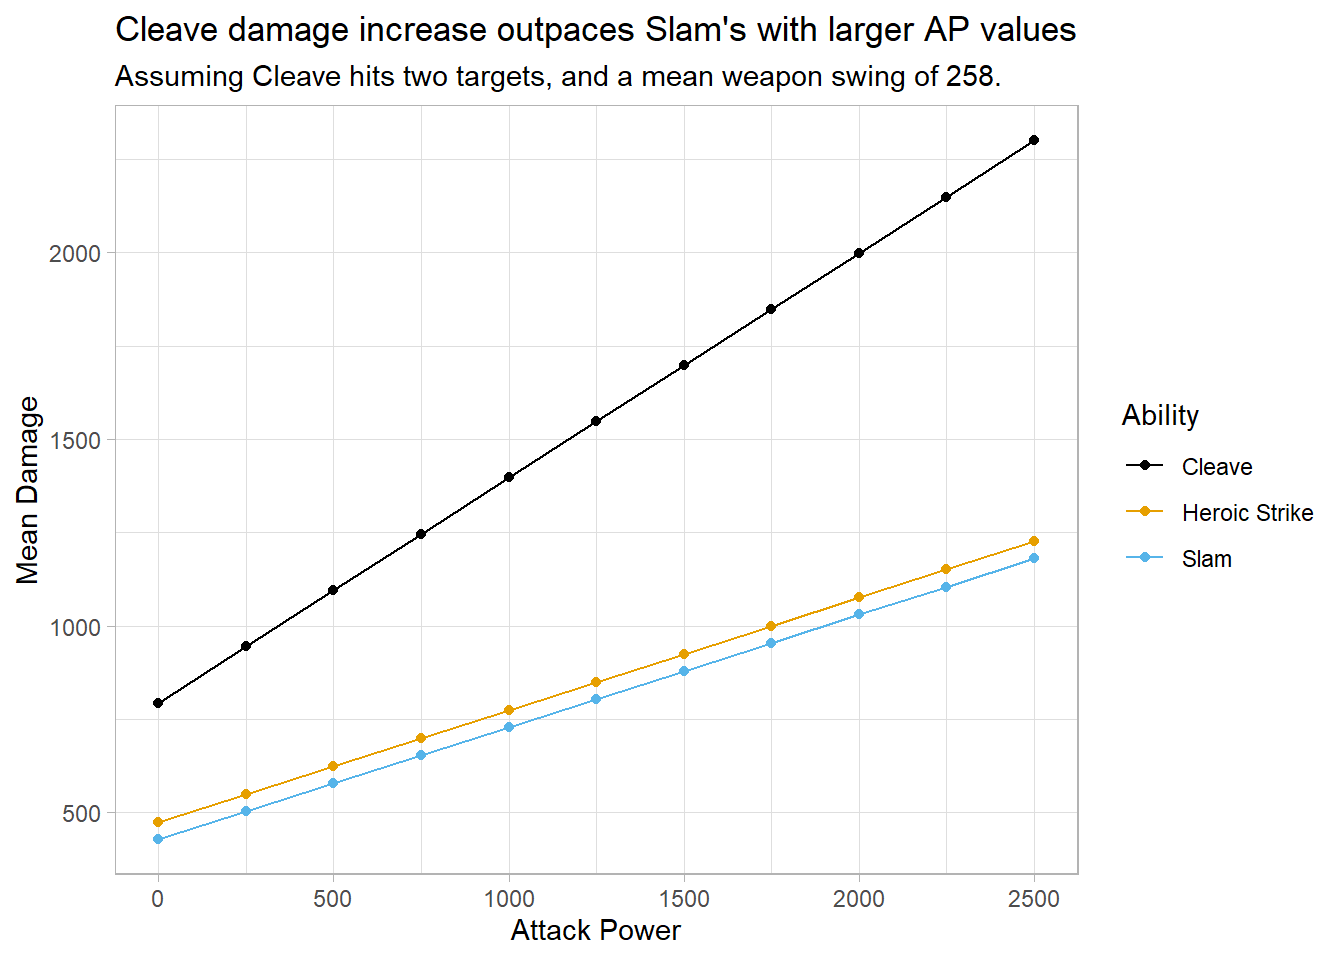 Comparison between Cleave, Heroic Strike, and Slam mean damage at varying attack power levels.